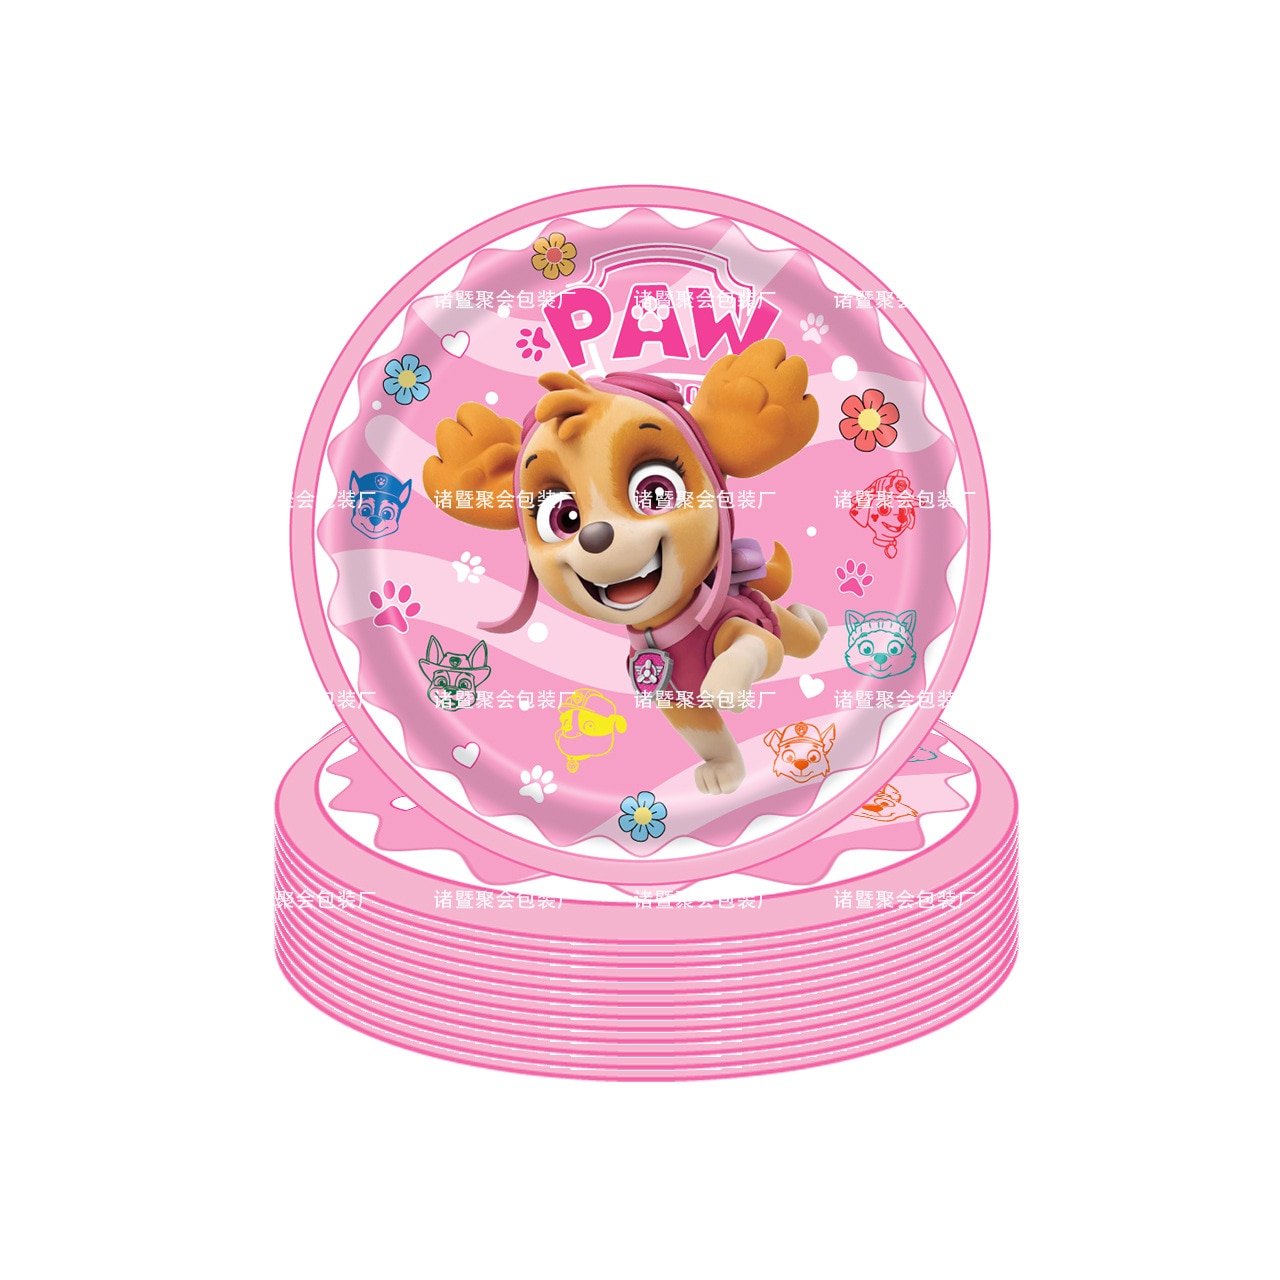 PAW Patrol Pink Skye Birthday Decoration Children Girl Tableware Paper Plate Cup Napkins Baby Shower Party 3 - Paw Patrol Plush